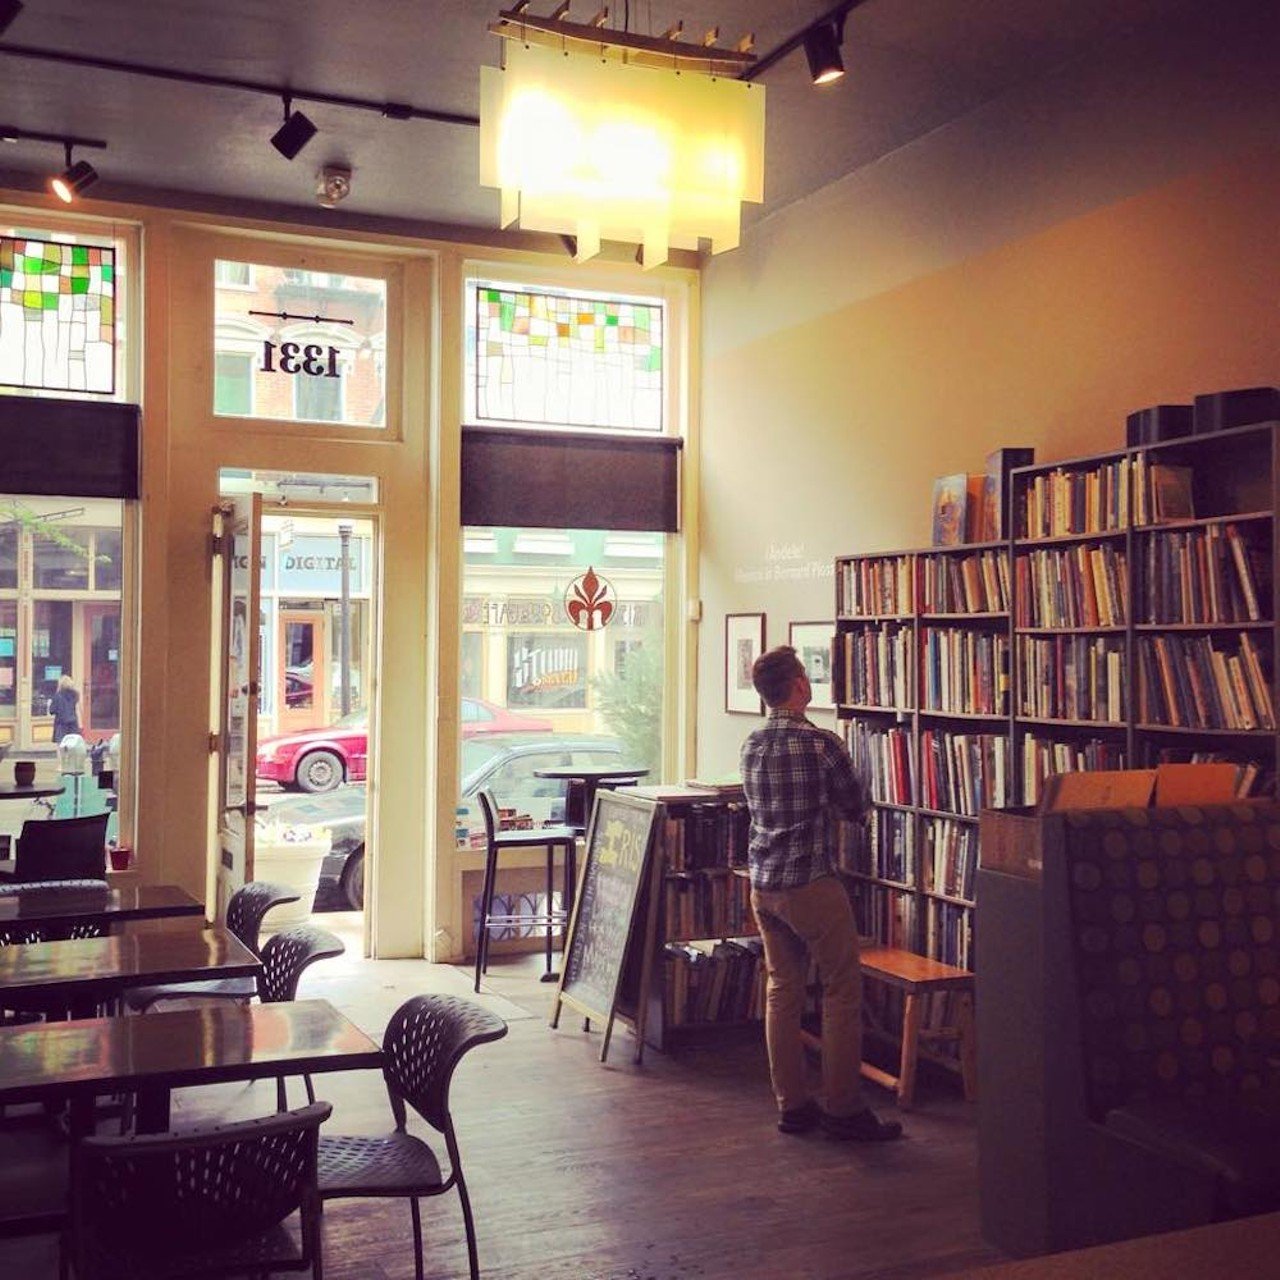 Iris Bookcafe
1331 Main St., Over-the-Rhine
With local food and a global vintage book collection, Iris Bookcafe is for solo adventurer looking for culture and a cozy shop to peruse. Iris Bookcafe carries books on a variety of topics, including film, drama, poetry, fashion and more. They also have a number of books in foreign languages and boast the largest collection of Polish books in Cincinnati. Also come back when the weather is nice and enjoy a locally roasted coffee on their intimate patio.